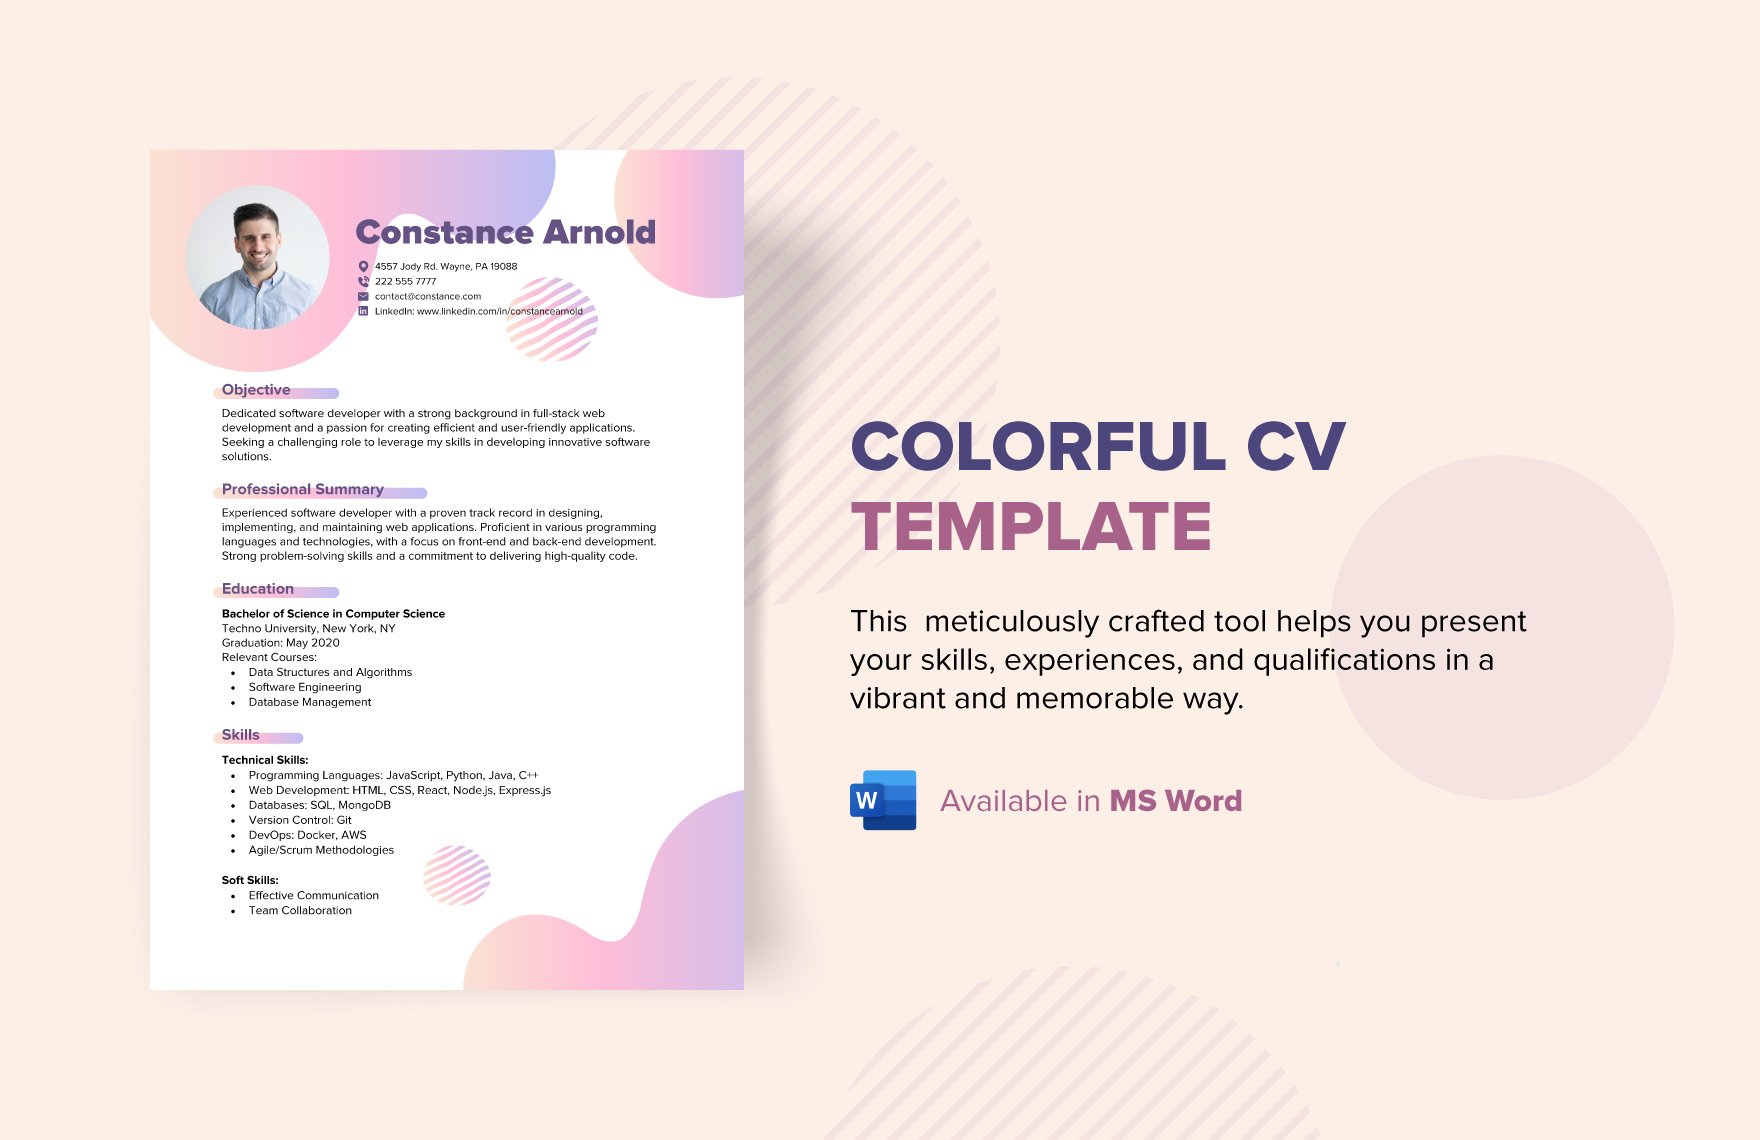 Colorful CV Template 